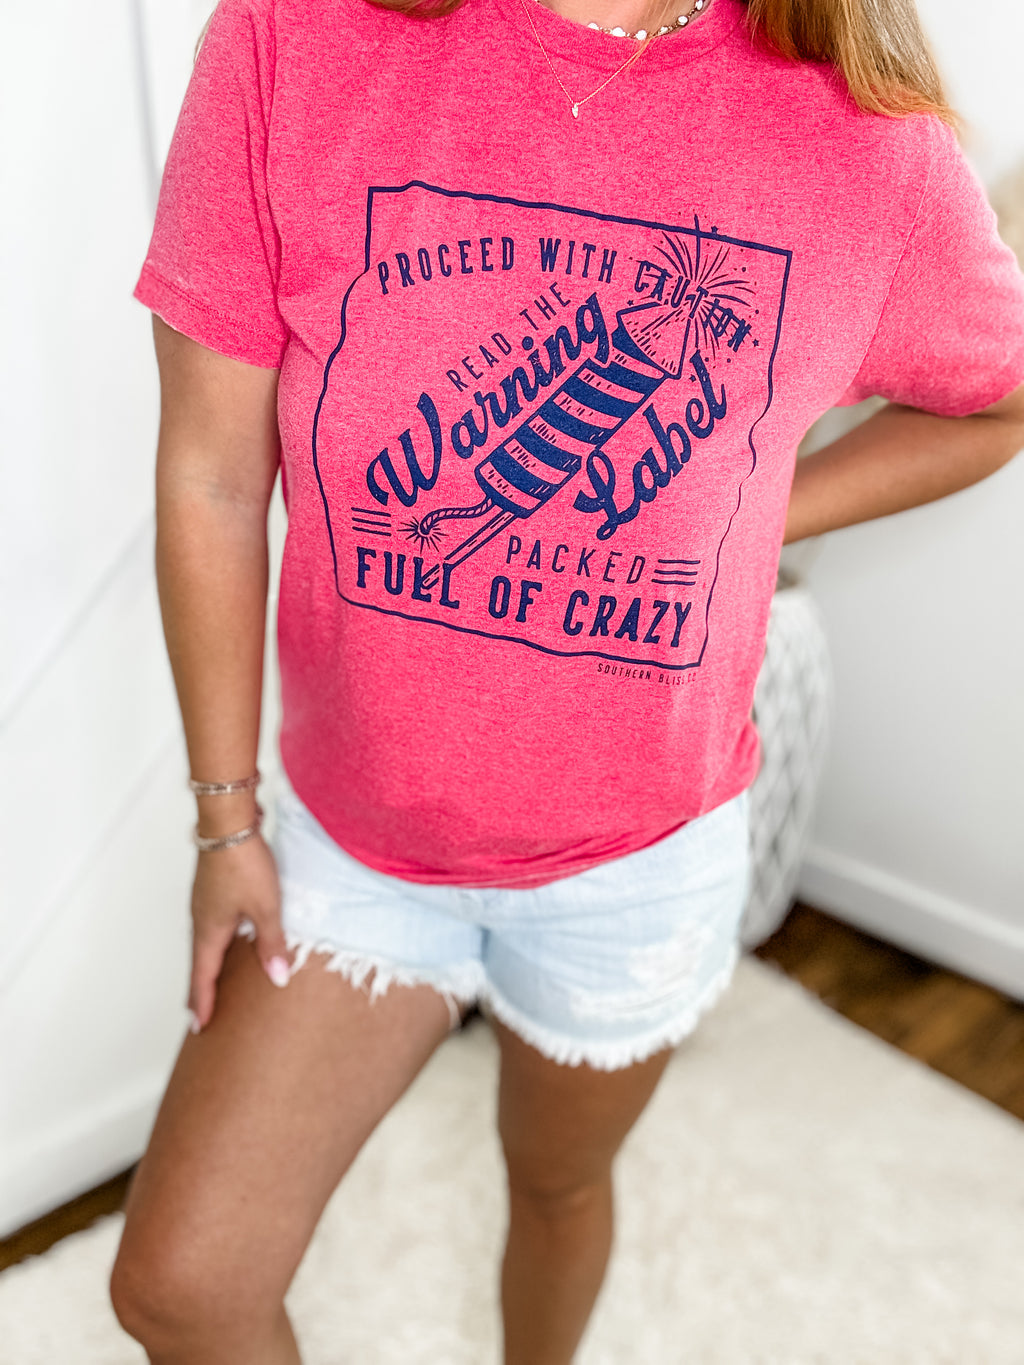 Proceed With Caution Fireworks Tee